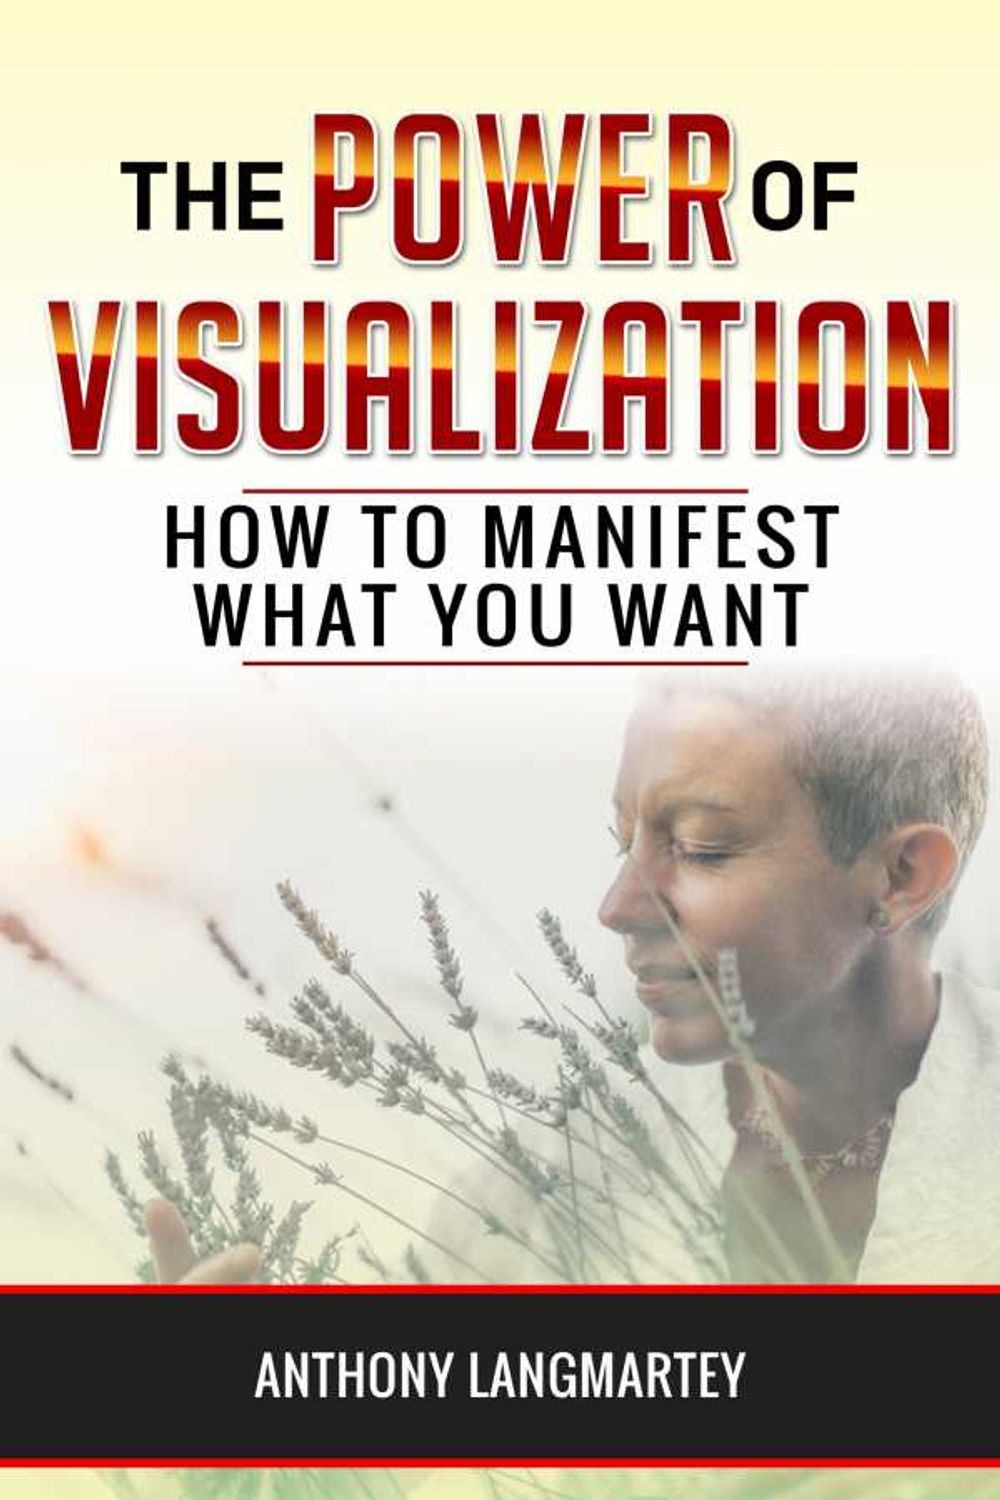 bw-the-power-of-visualization-the-spirit-and-truth-9783985518944